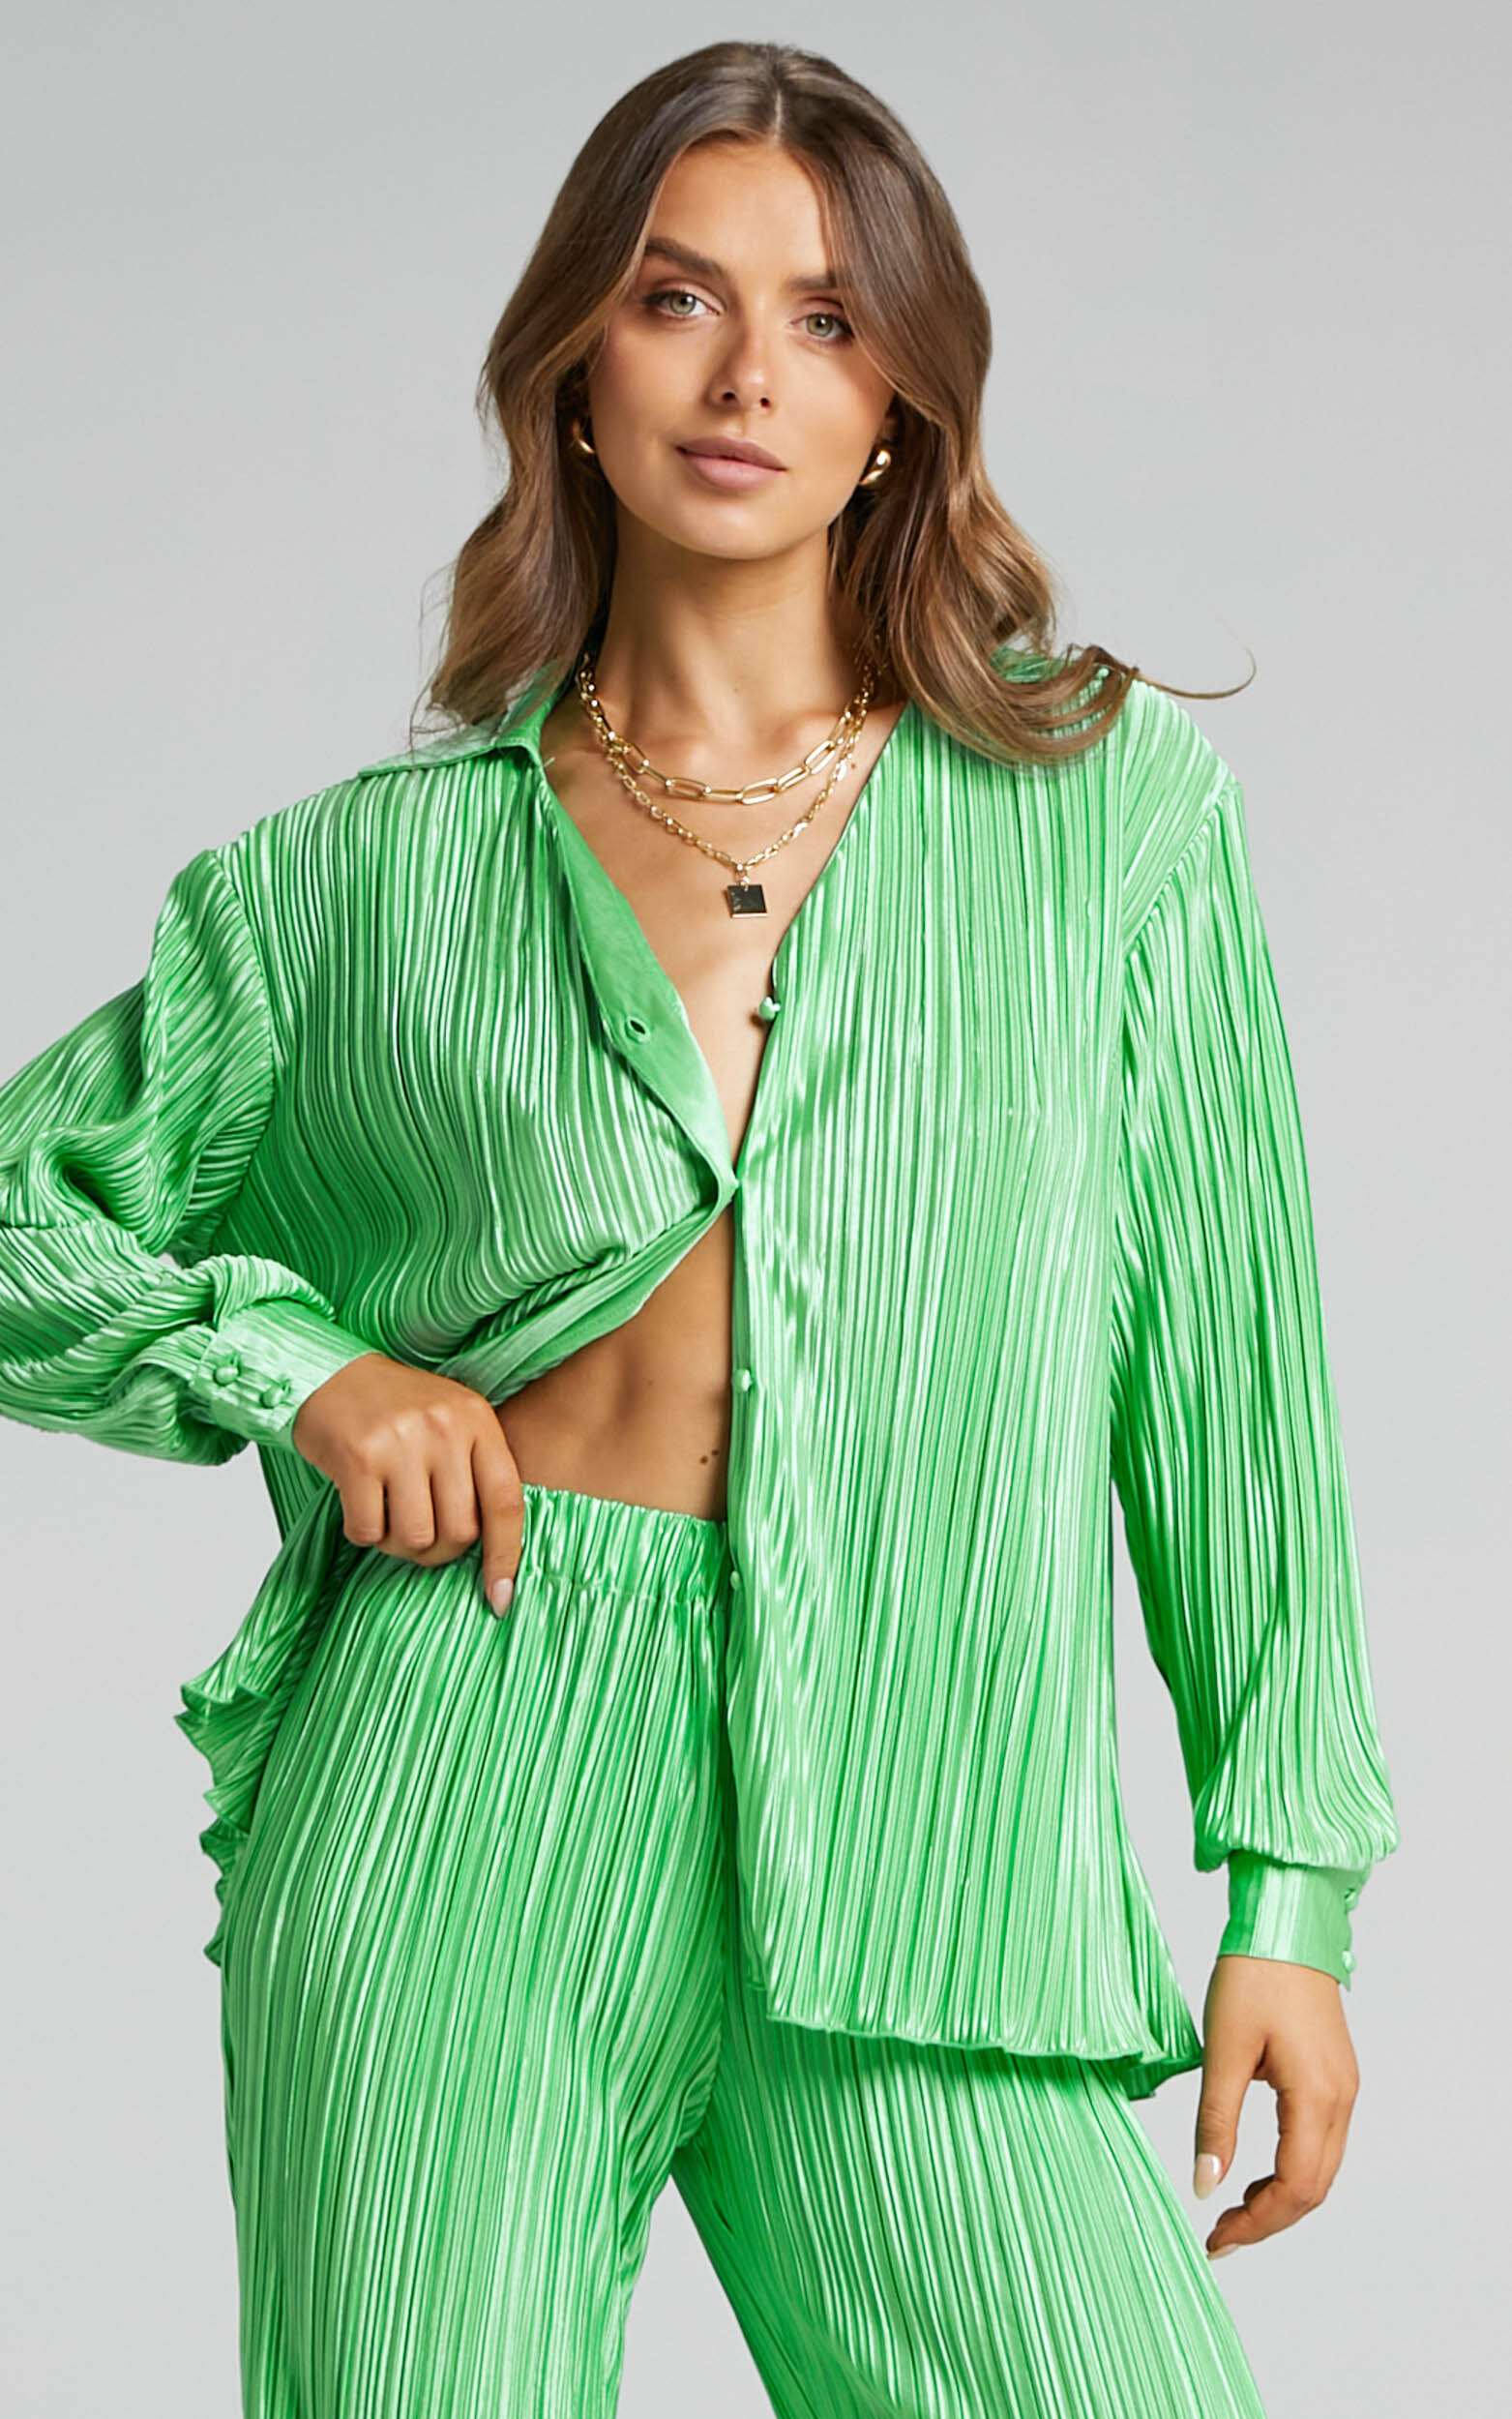 Beca Plisse Button up Shirt in Bright Green - 06, GRN5, hi-res image number null